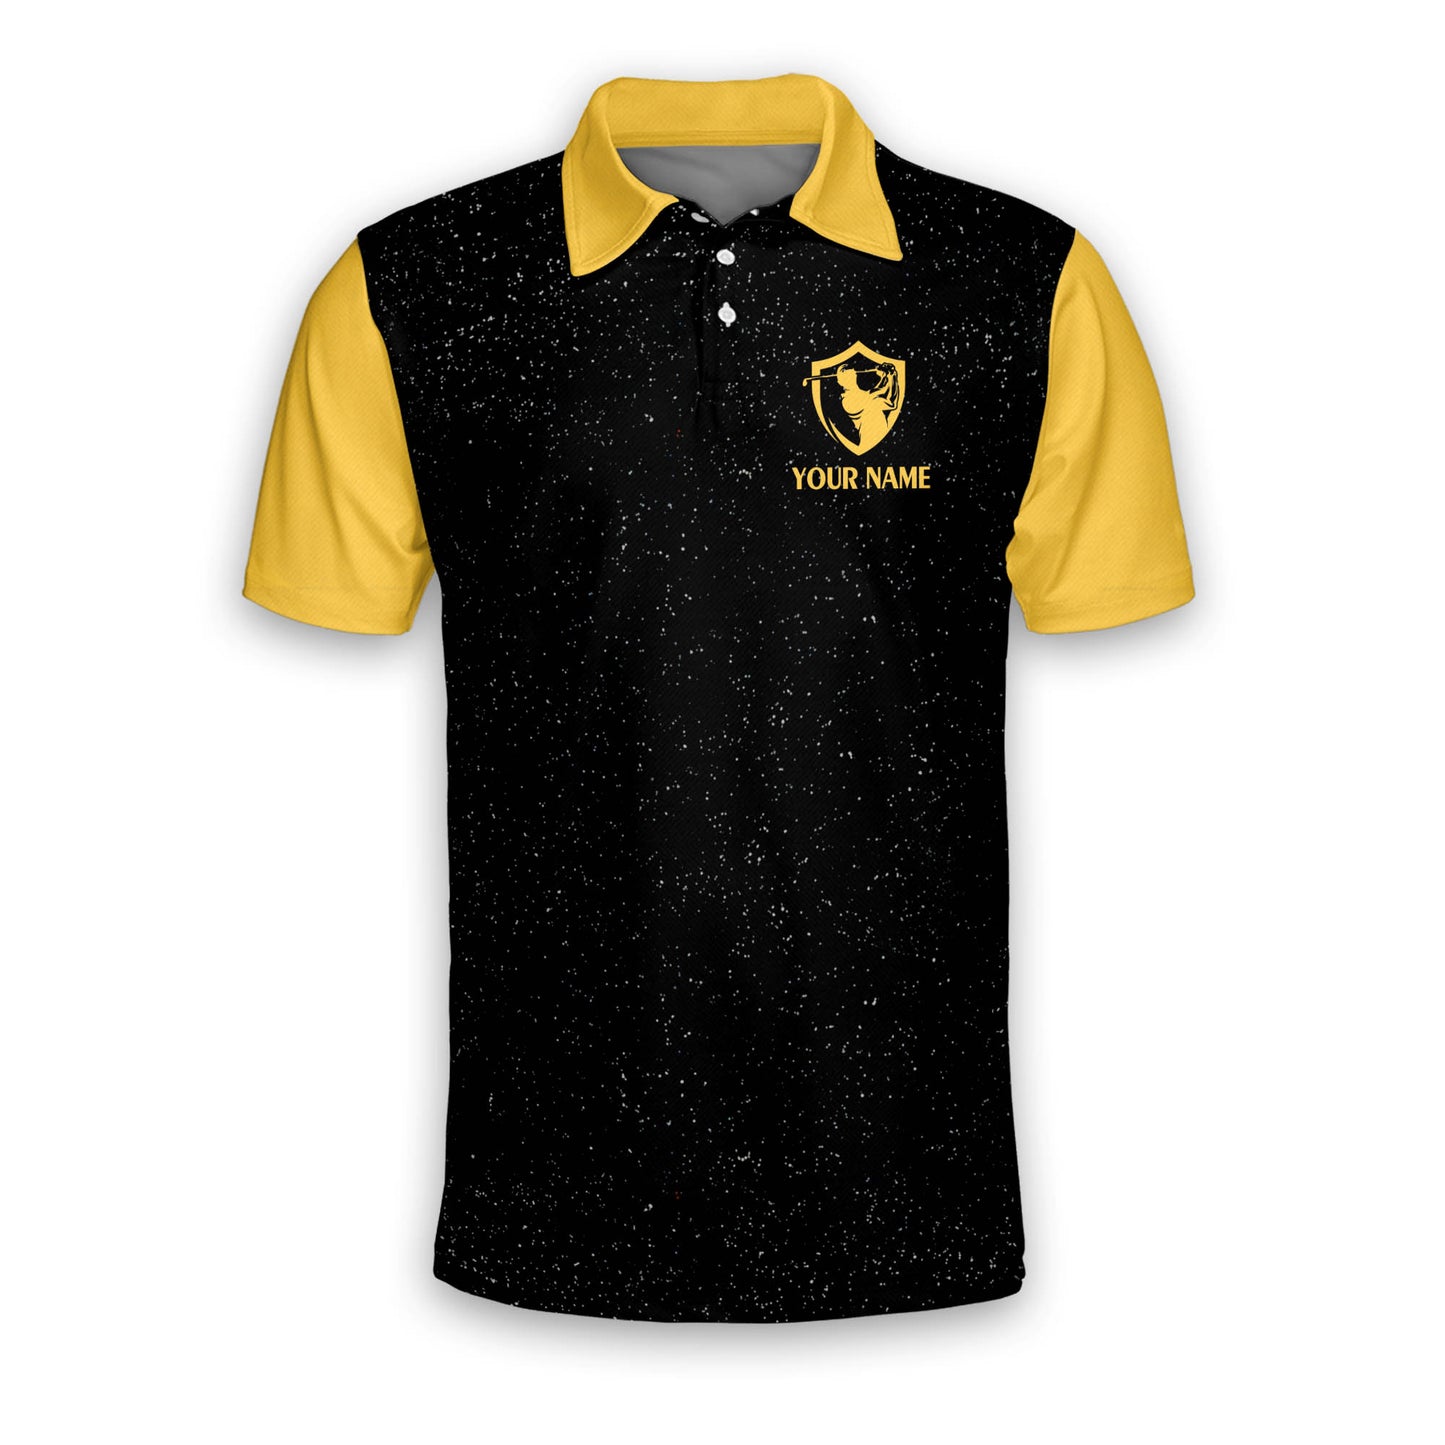 That's What I Do I Play Golf I Drink And I Know Things Golf Polo Shirt GM0193